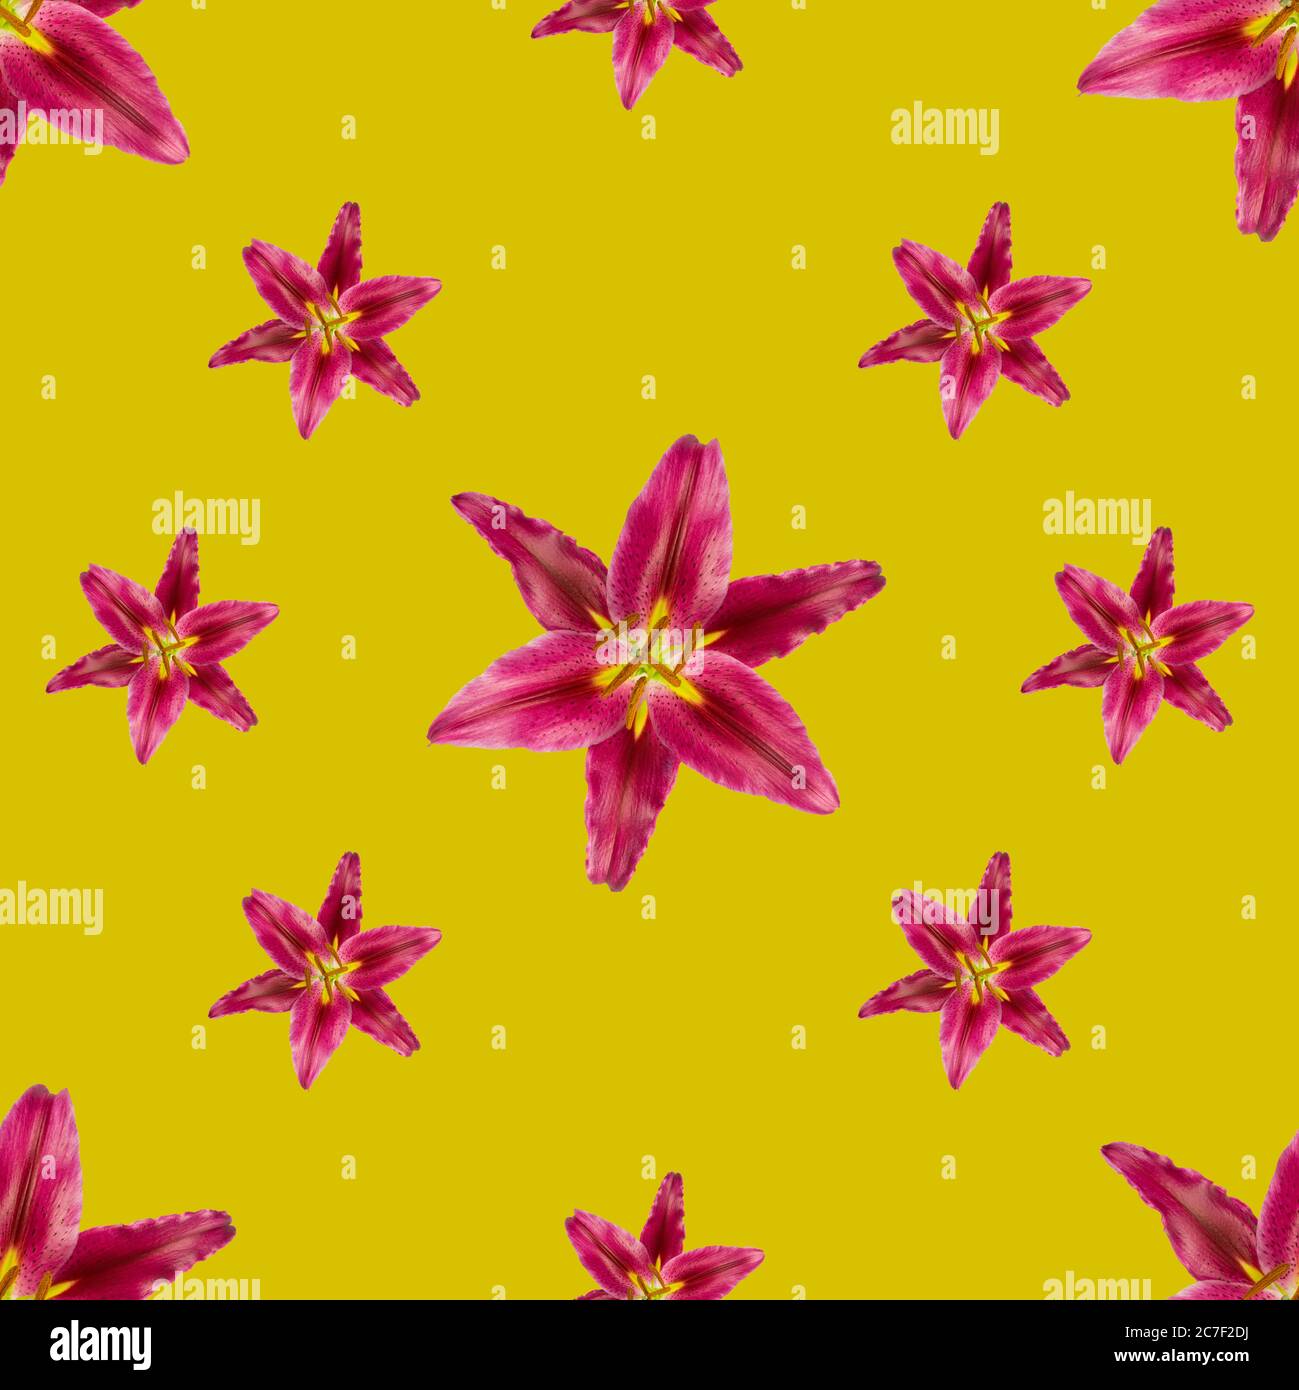 Seamless pattern with deep magenta pink Oriental stargazer lilies in two sizes on vivid yellow background. Stock Photo